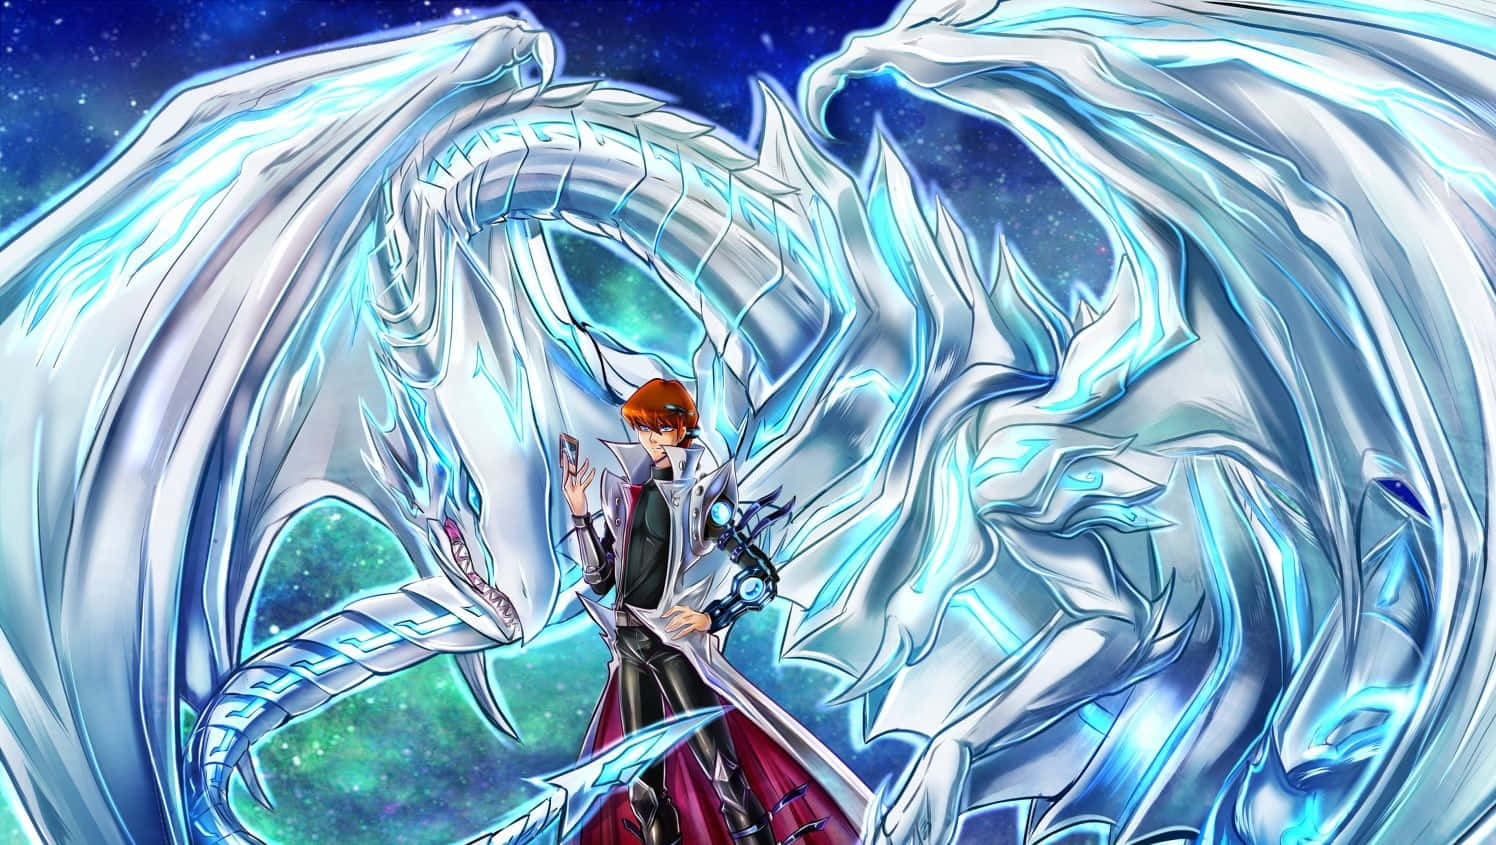 Download Blue Eyes White Dragon In Combat Wallpaper | Wallpapers.com